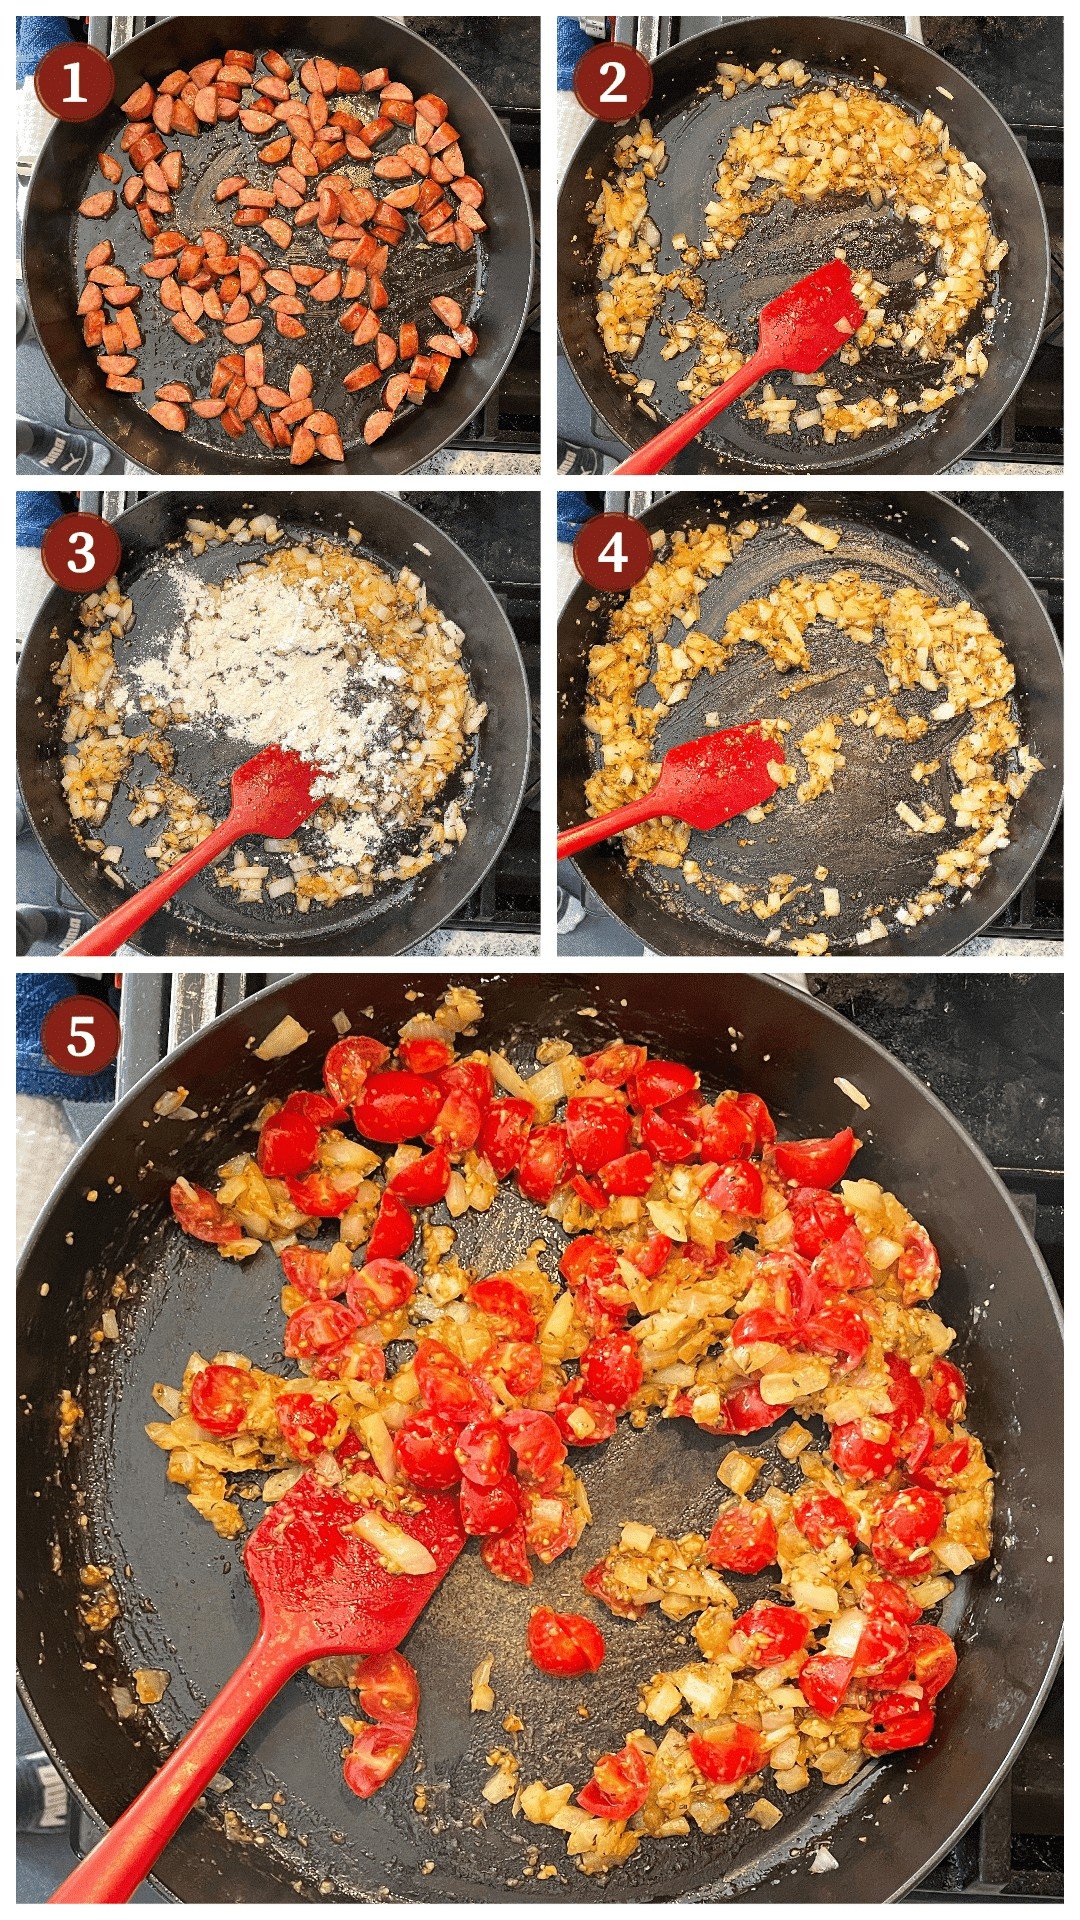 A collage of images showing how to make creole shakshuka, steps 1 - 5.